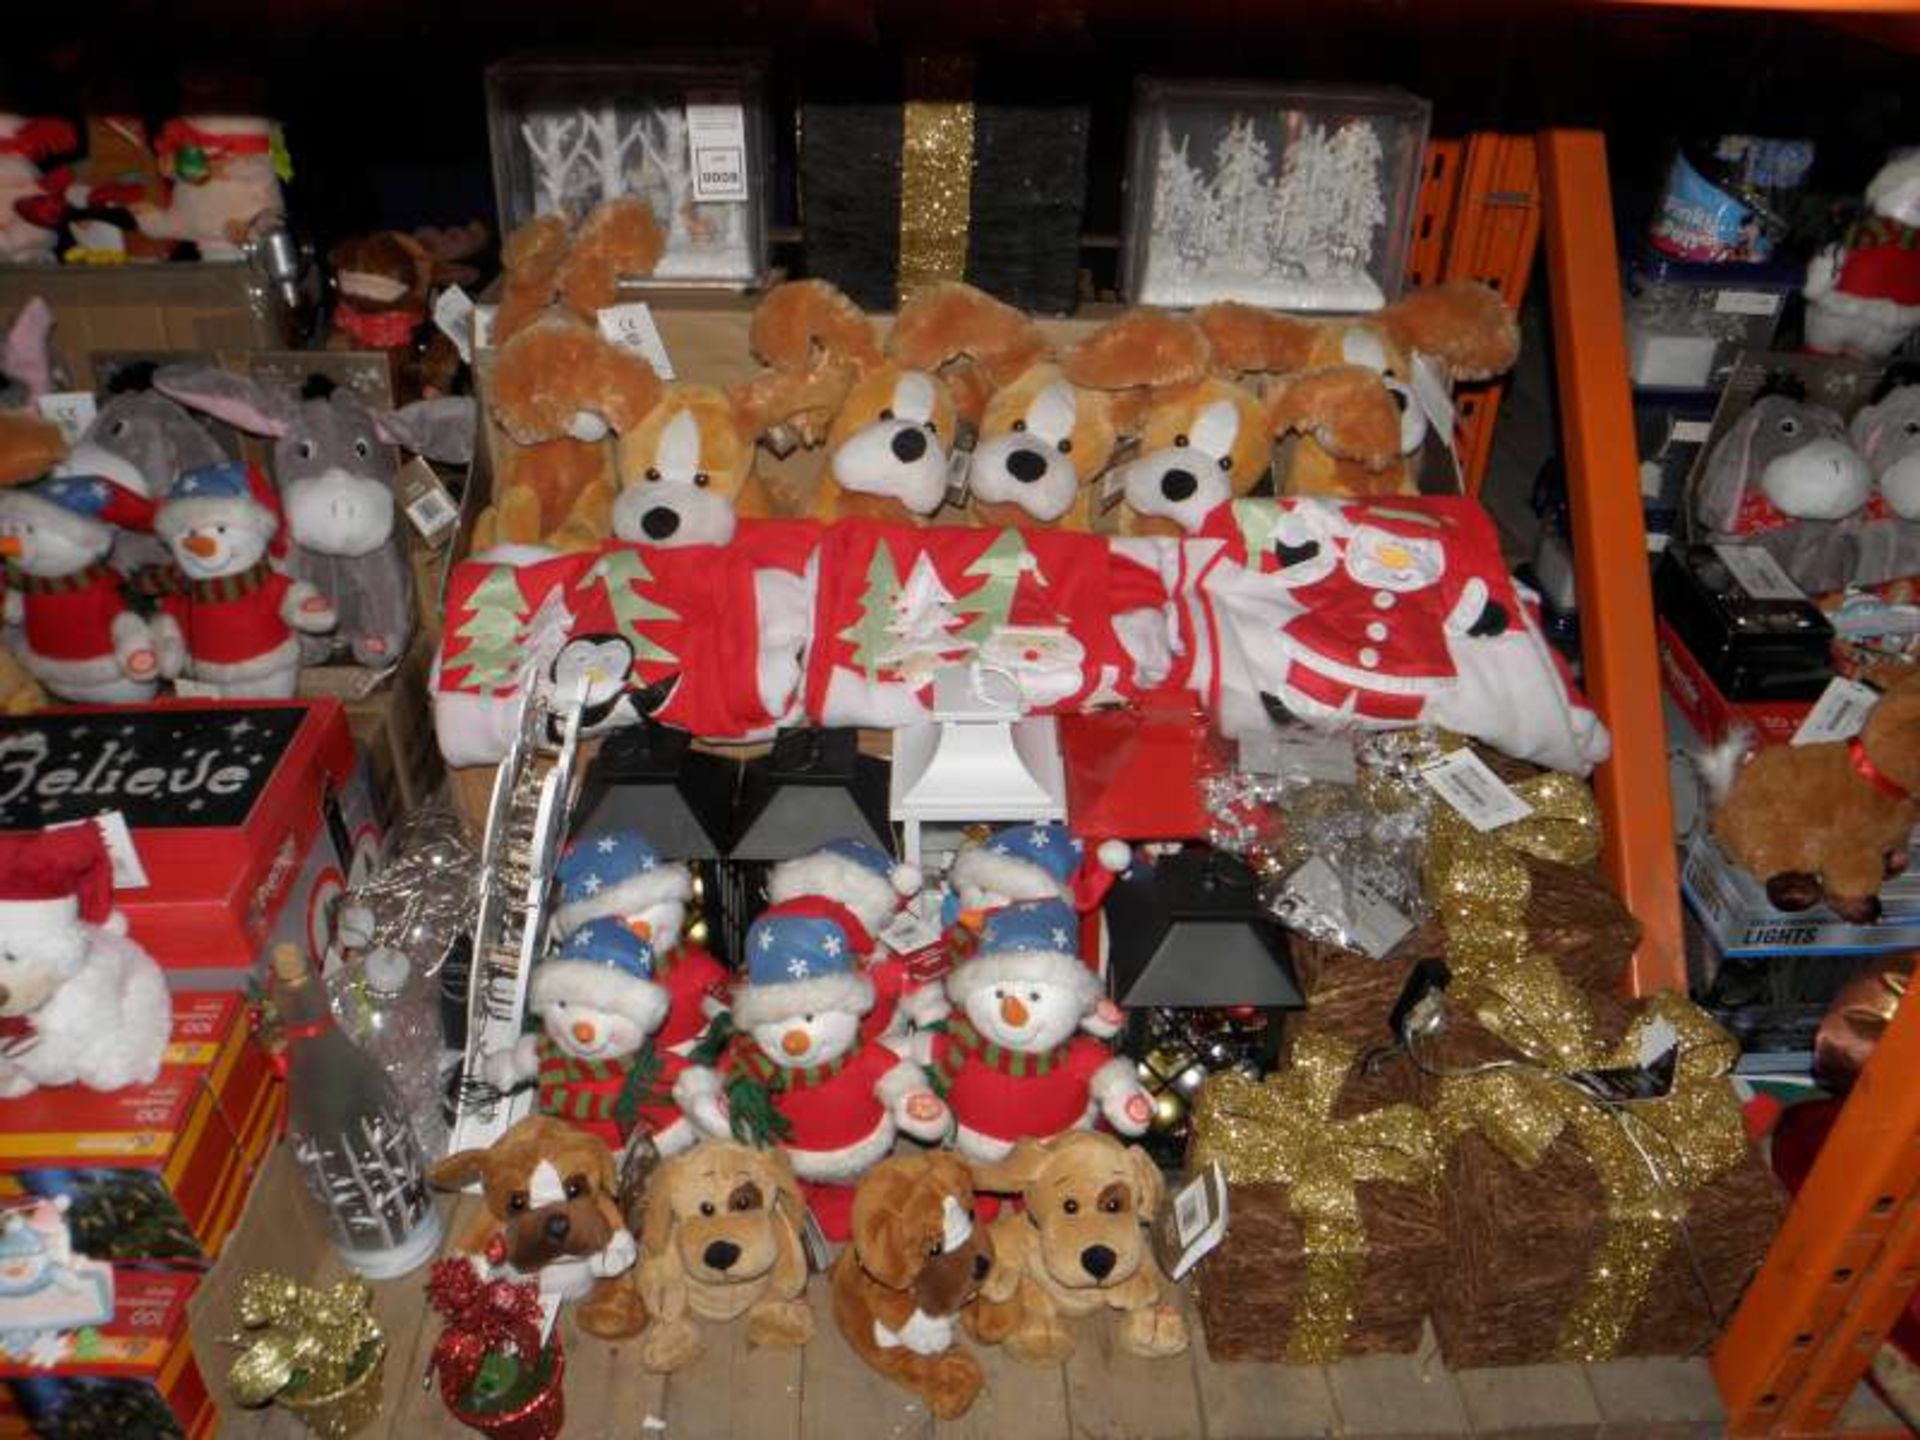 PREMIER CHRISTMAS LOT CONTAINING LANTERNS, STOCKINGS, MUSICAL CHARACTERS, LED PARCELS, BAUBLES, ETC